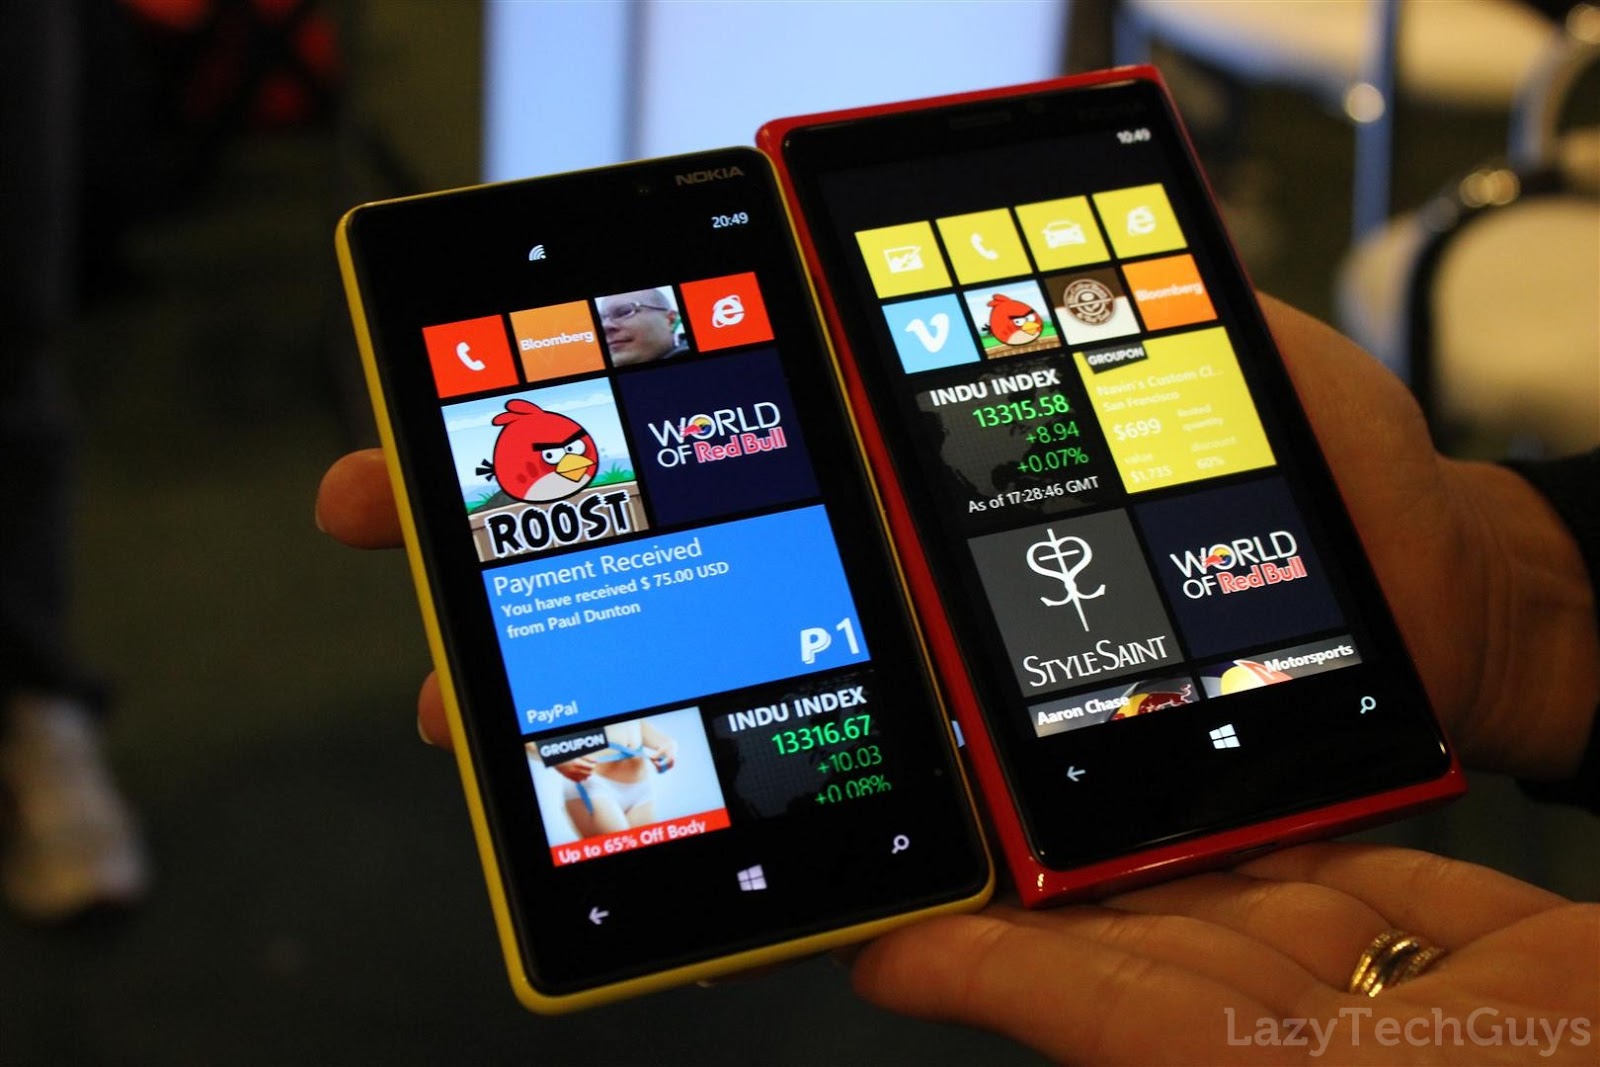 Nokia Lumia 820 Wallpapers HD | Amazing Wallpapers